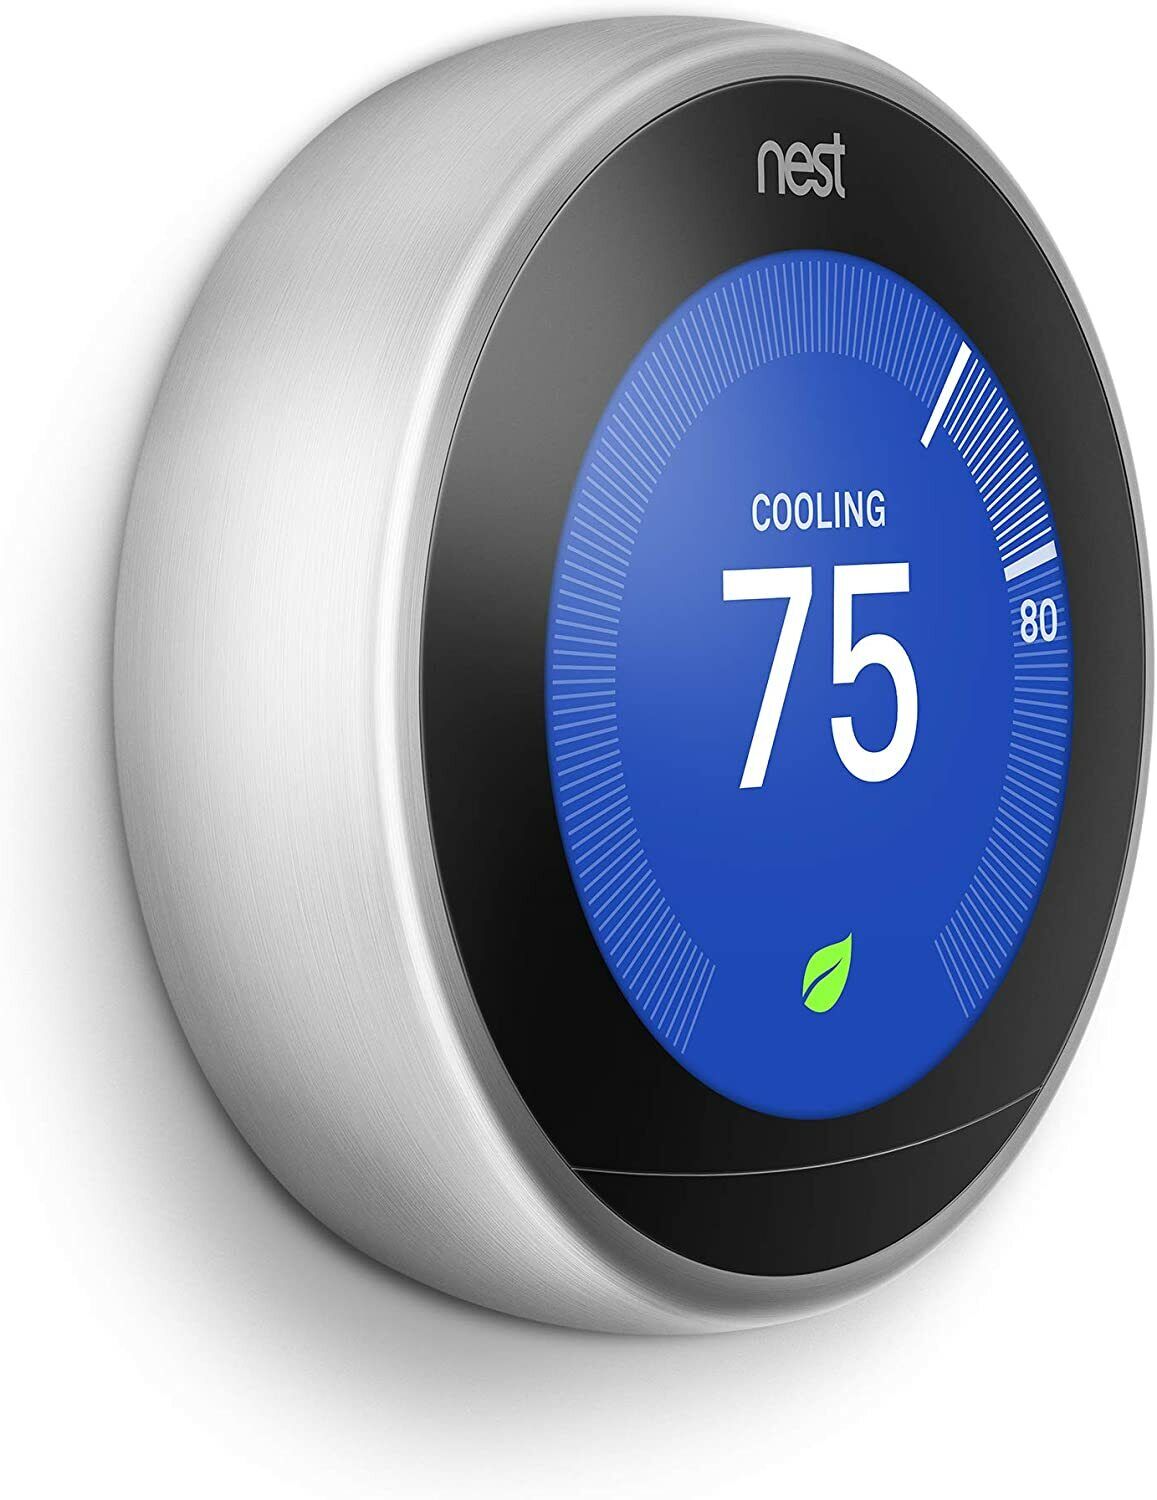 REPLACEMENT:Google Nest 3rd Generation Learning Stainless Steel Smart Thermostat